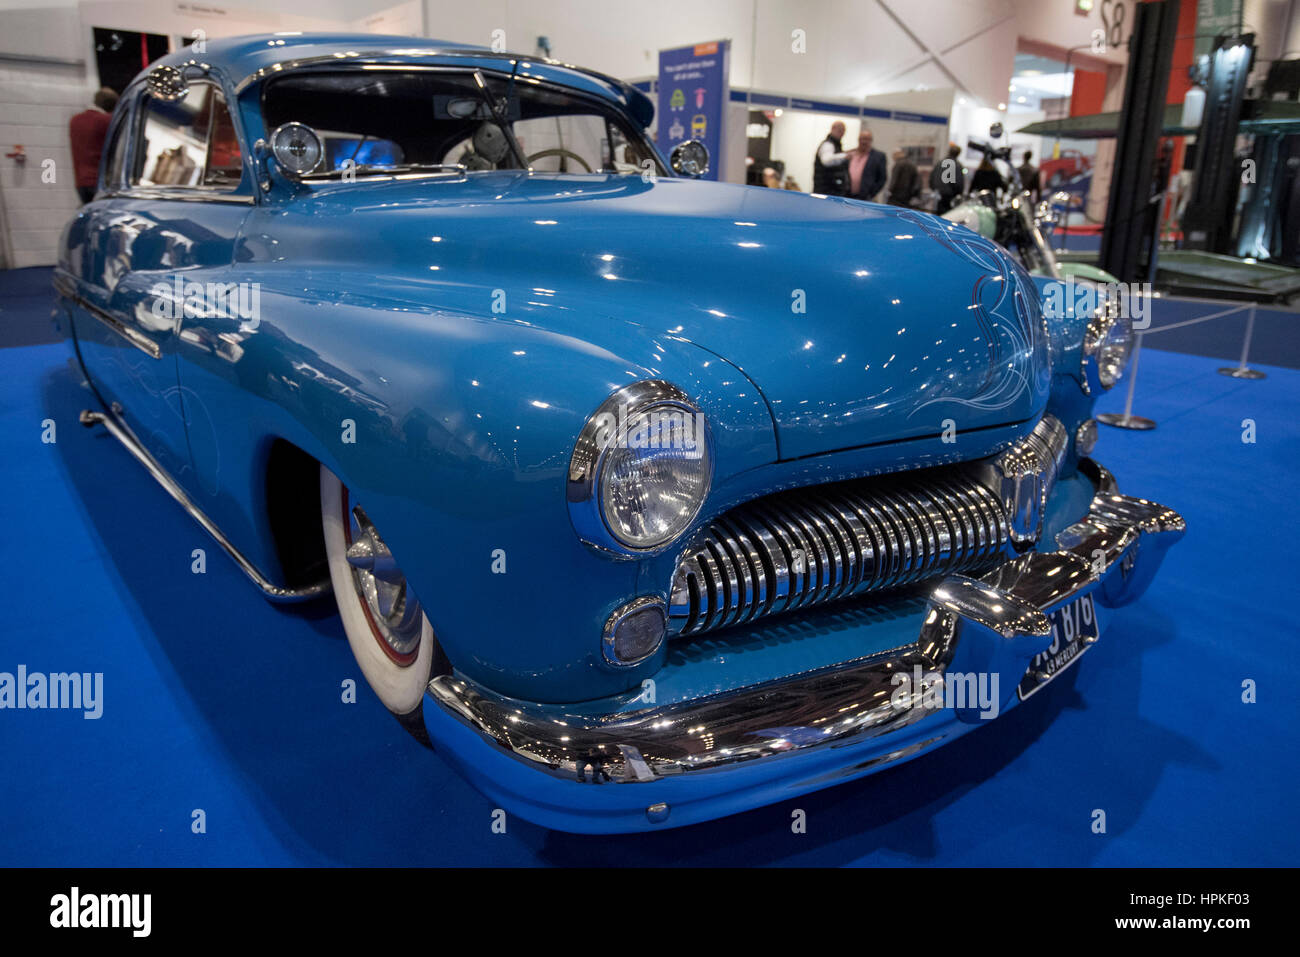 London, UK.  23 February 2017. A 1949 Lincoln Mercury on display at the London Classic Car Show at Excel, Docklands.   Now in its third year, the four day event is aimed at the discerning classic car owner, collector, expert or enthusiast and is an international celebration of the very best dealers, manufacturers, car clubs and products.   Credit: Stephen Chung / Alamy Live News Stock Photo